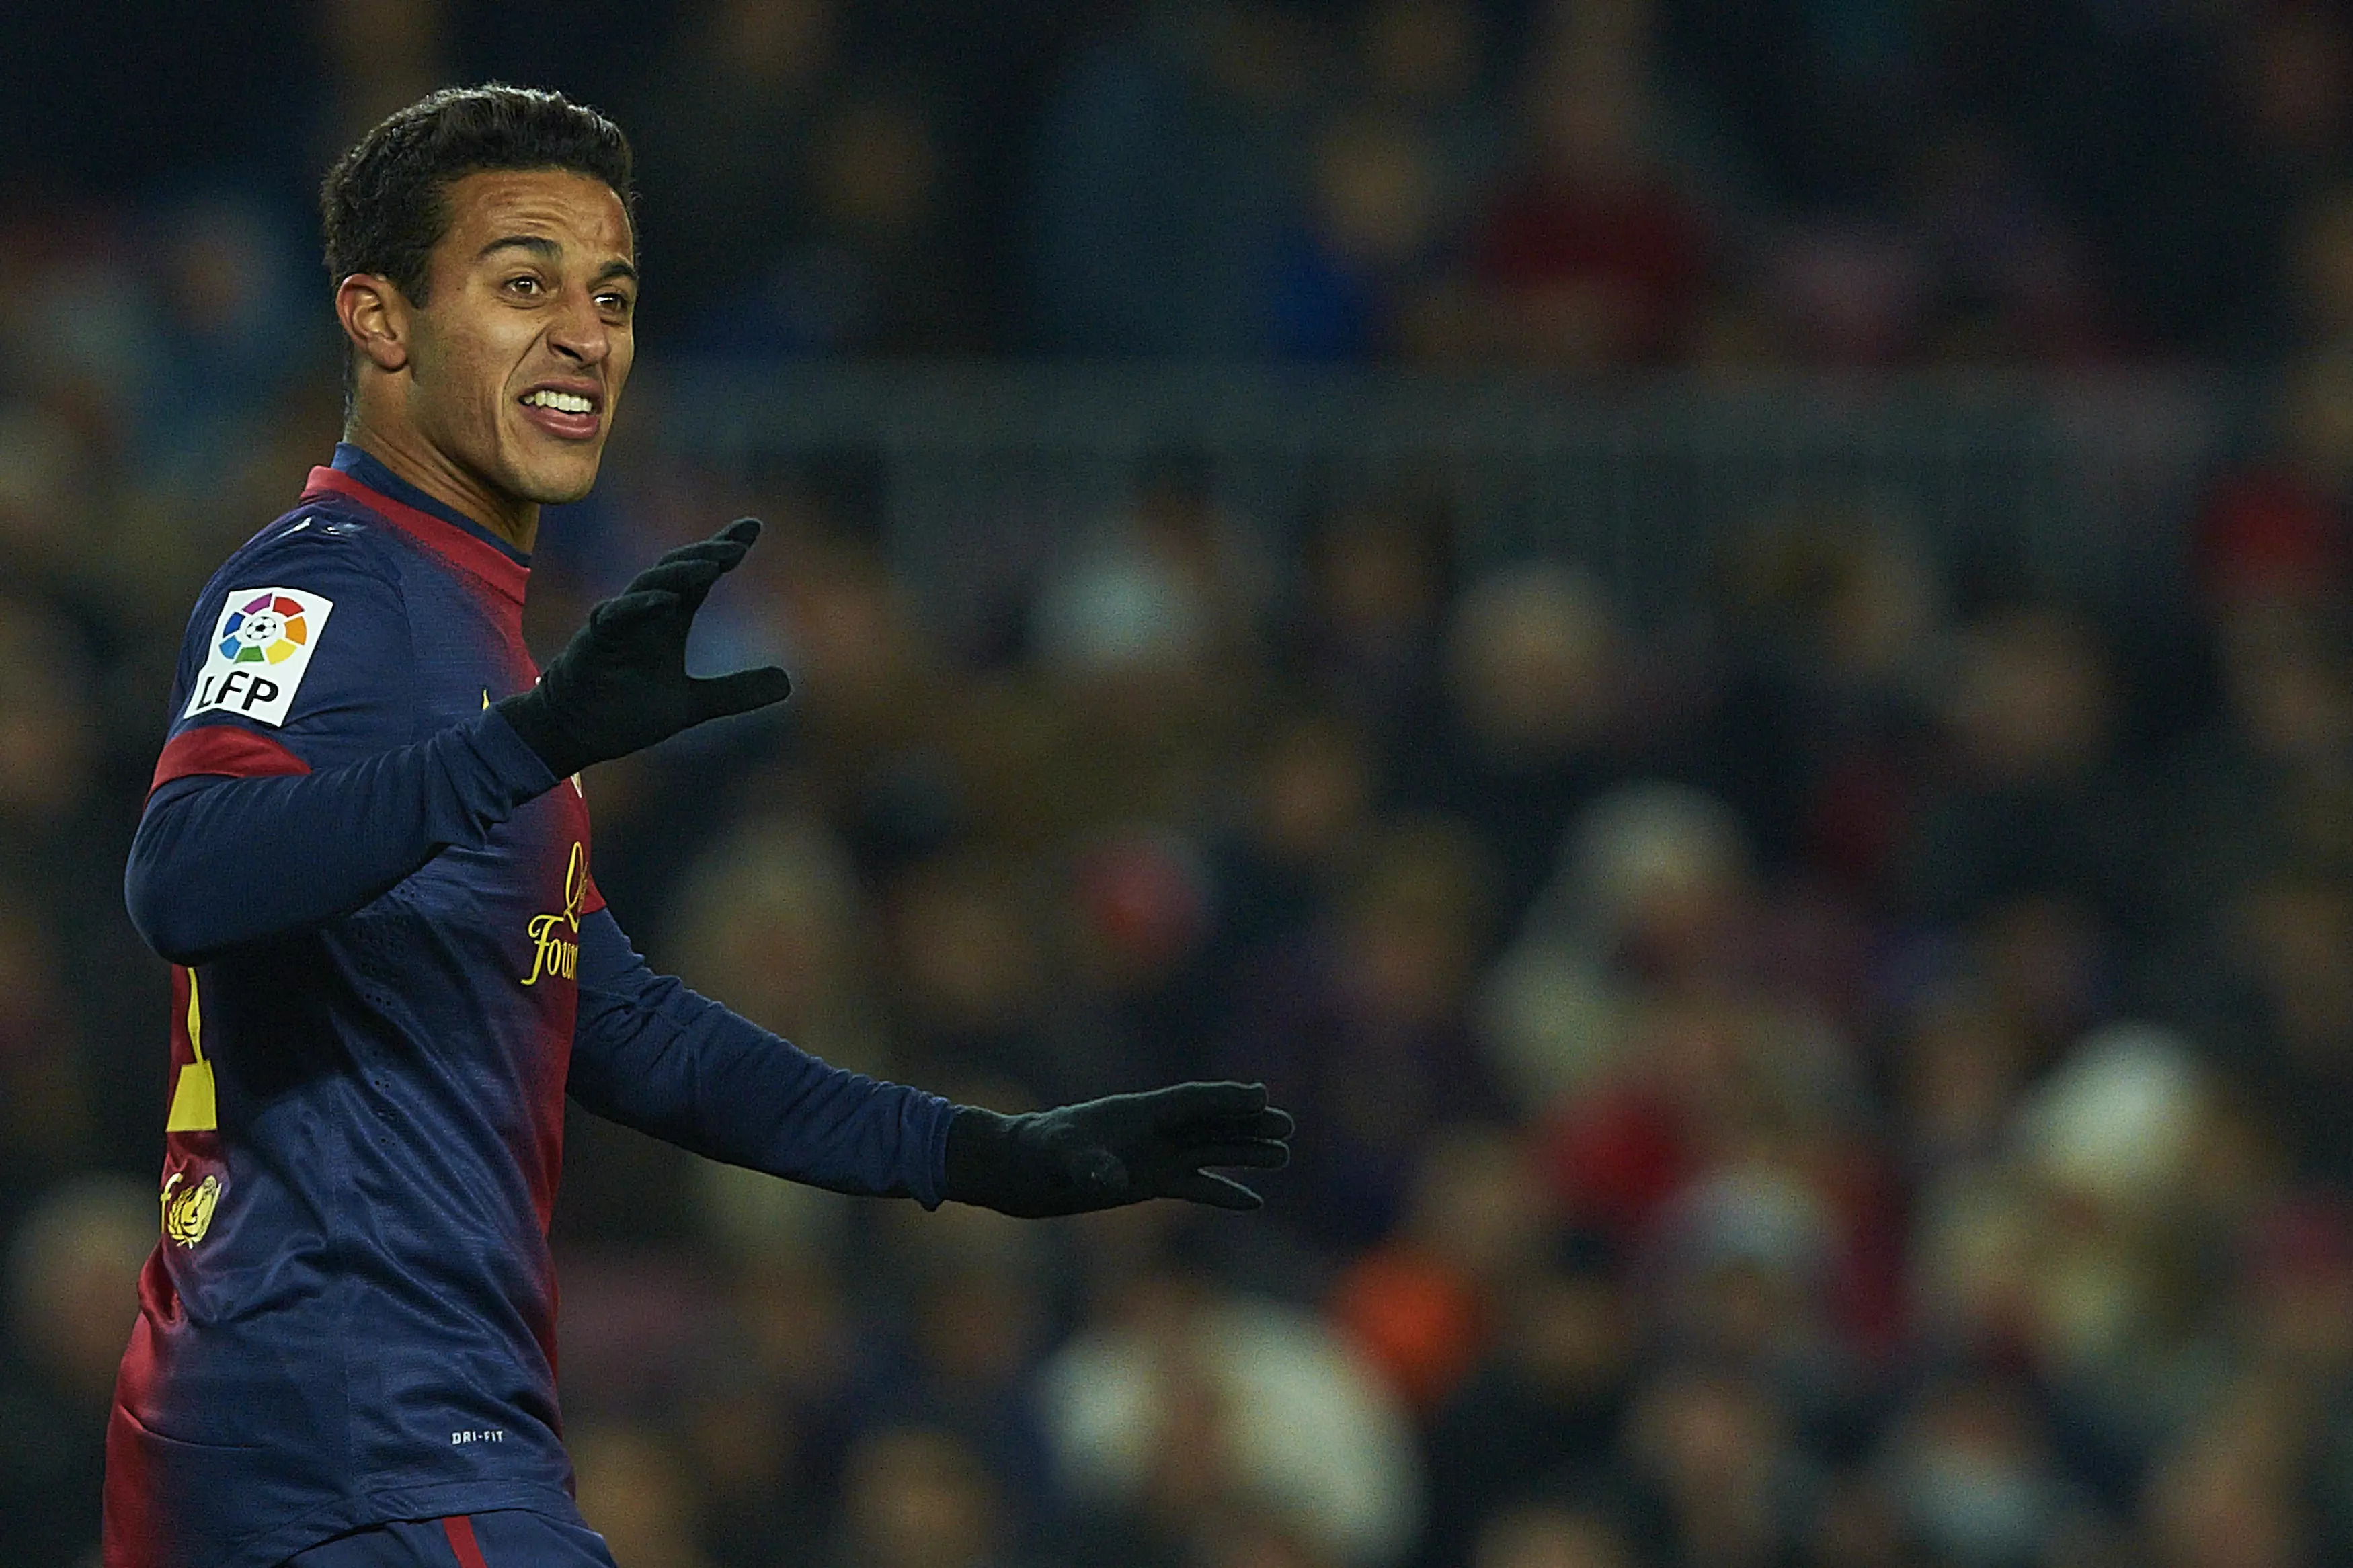 Could Thiago head back to Barca? Image: PA Images